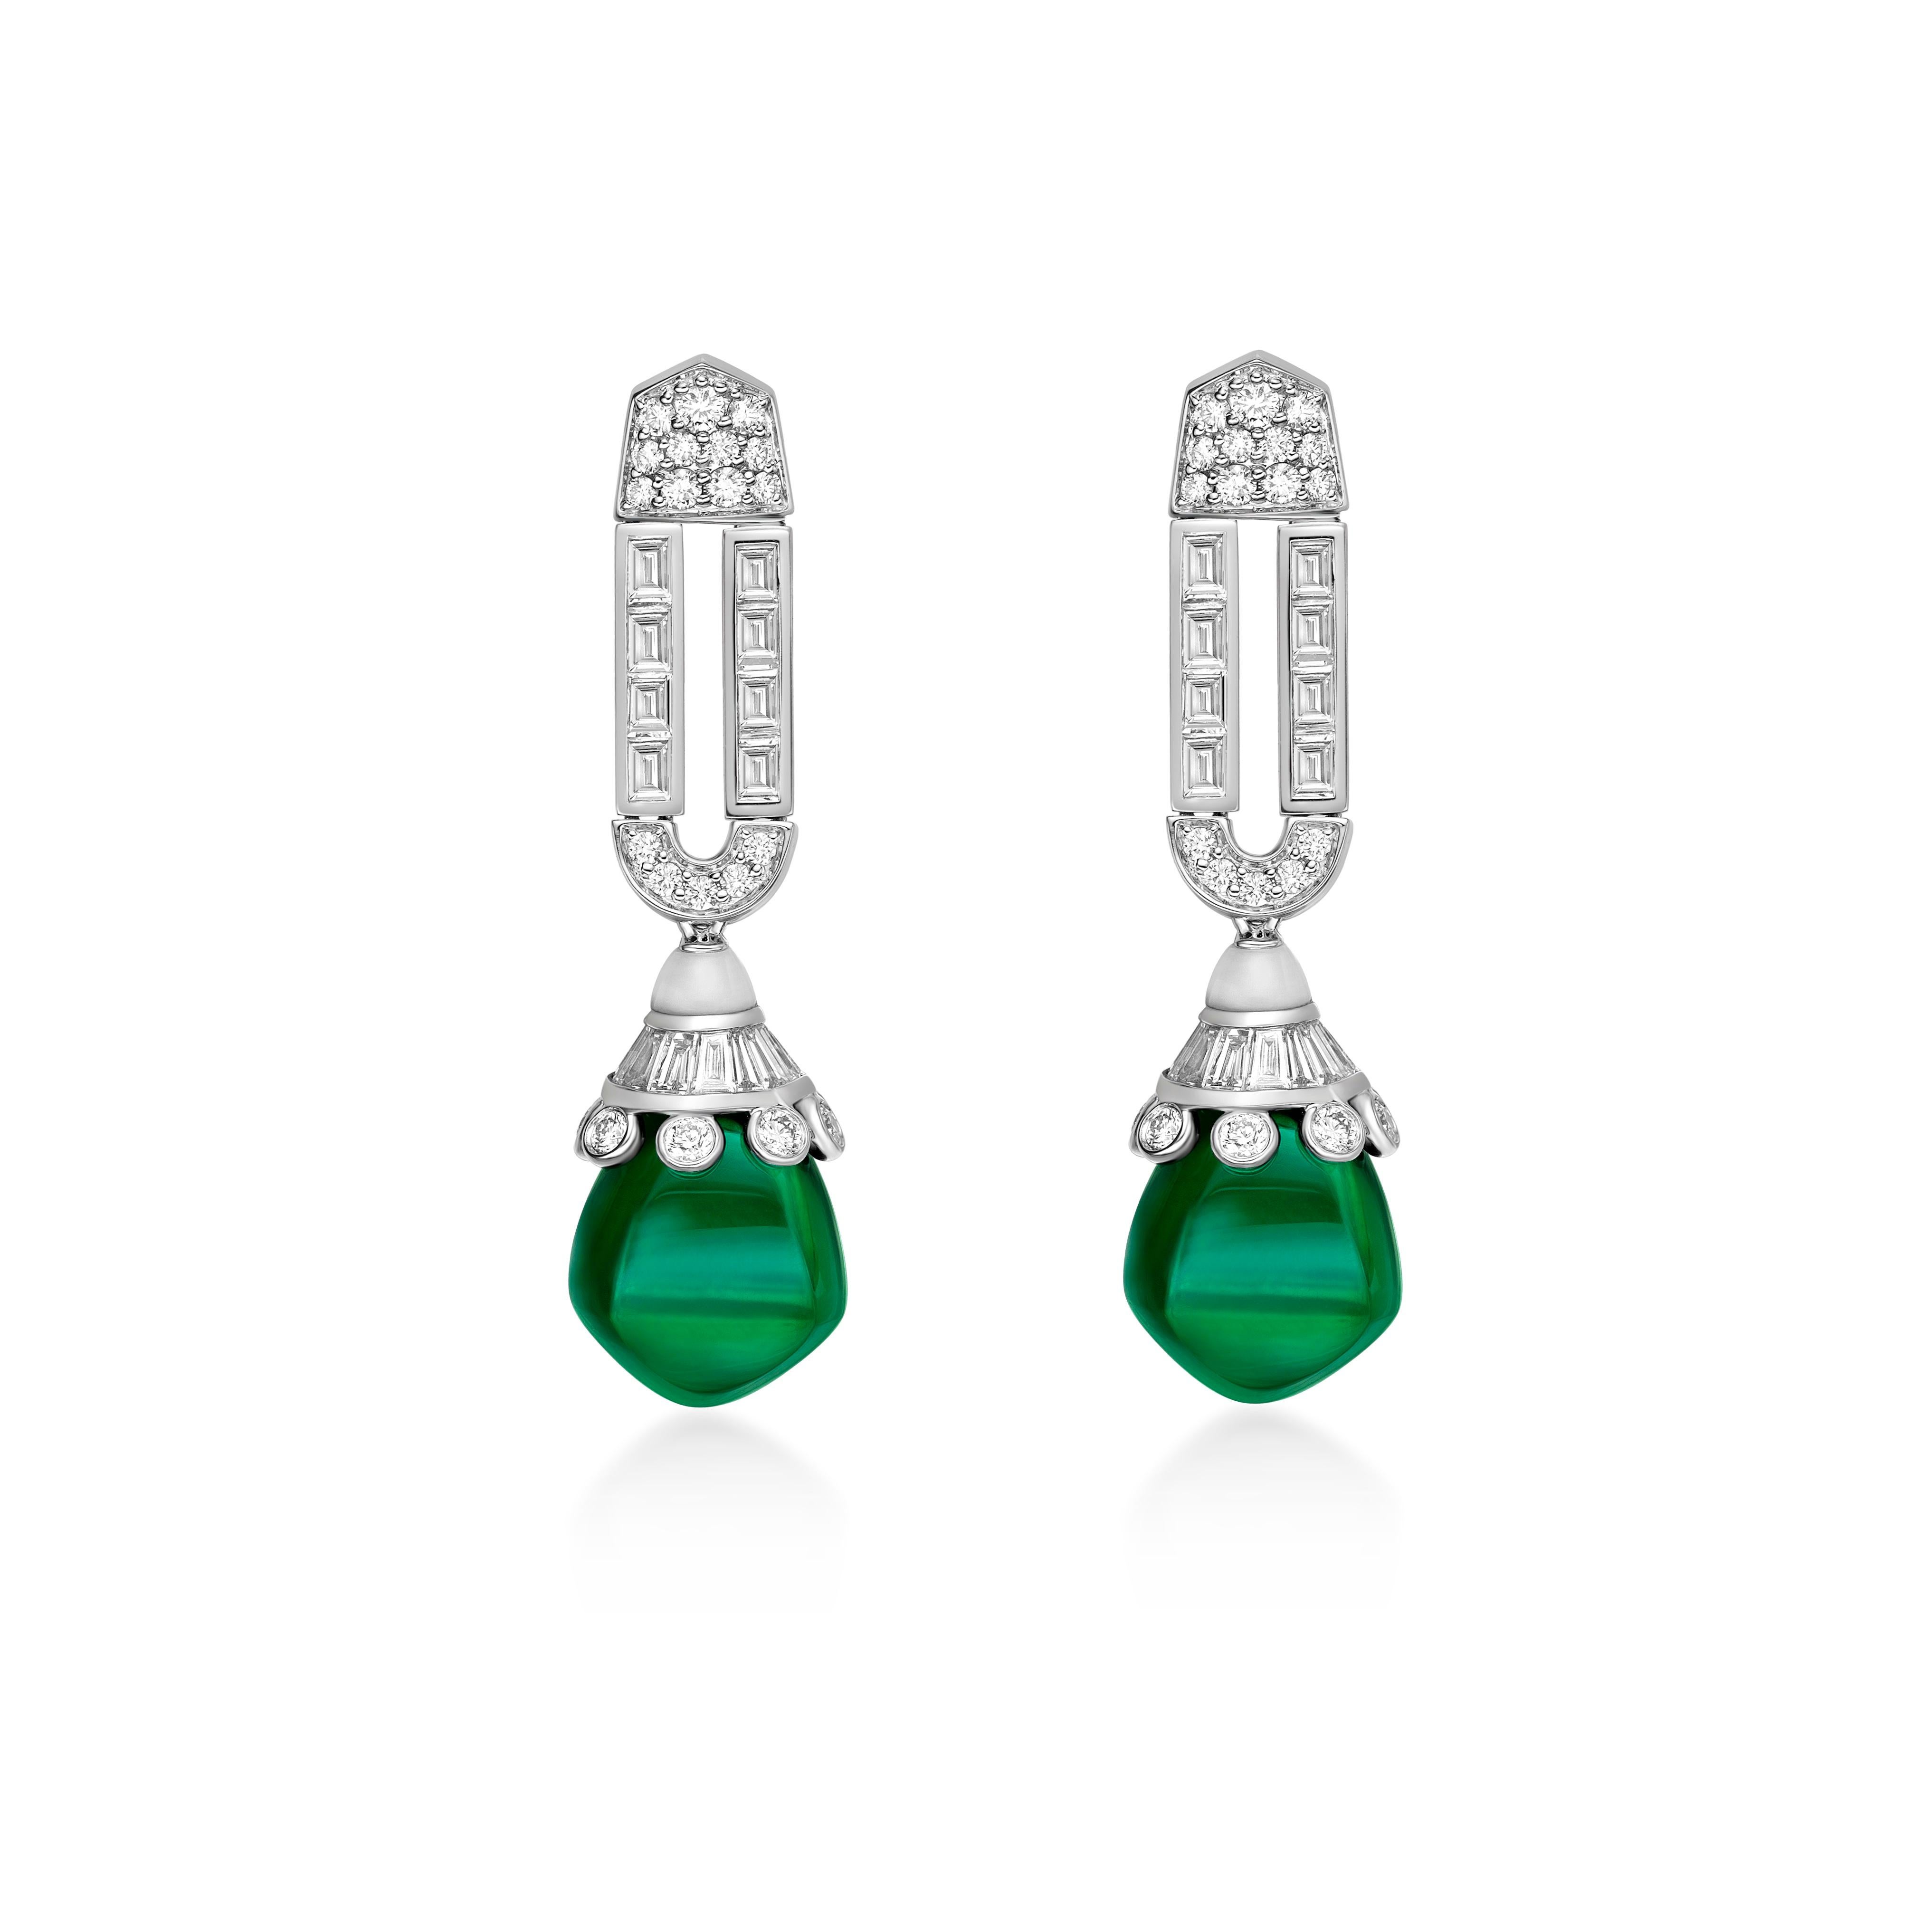 Contemporary 27.83 Carat Green Tourmaline Drop Earrings in 18Karat White Gold with Diamond. For Sale